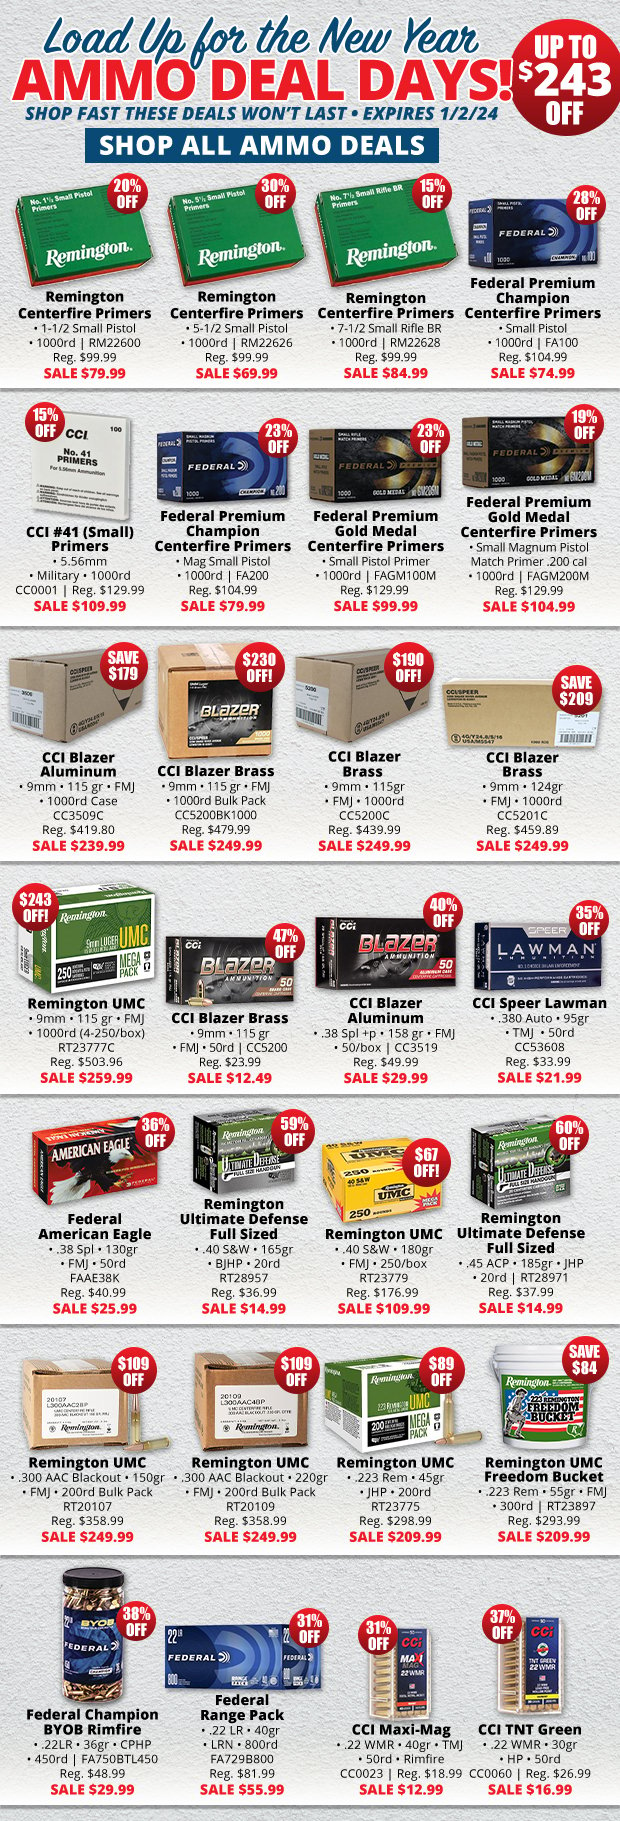 Ammo Deal Days with Up to $243 Off